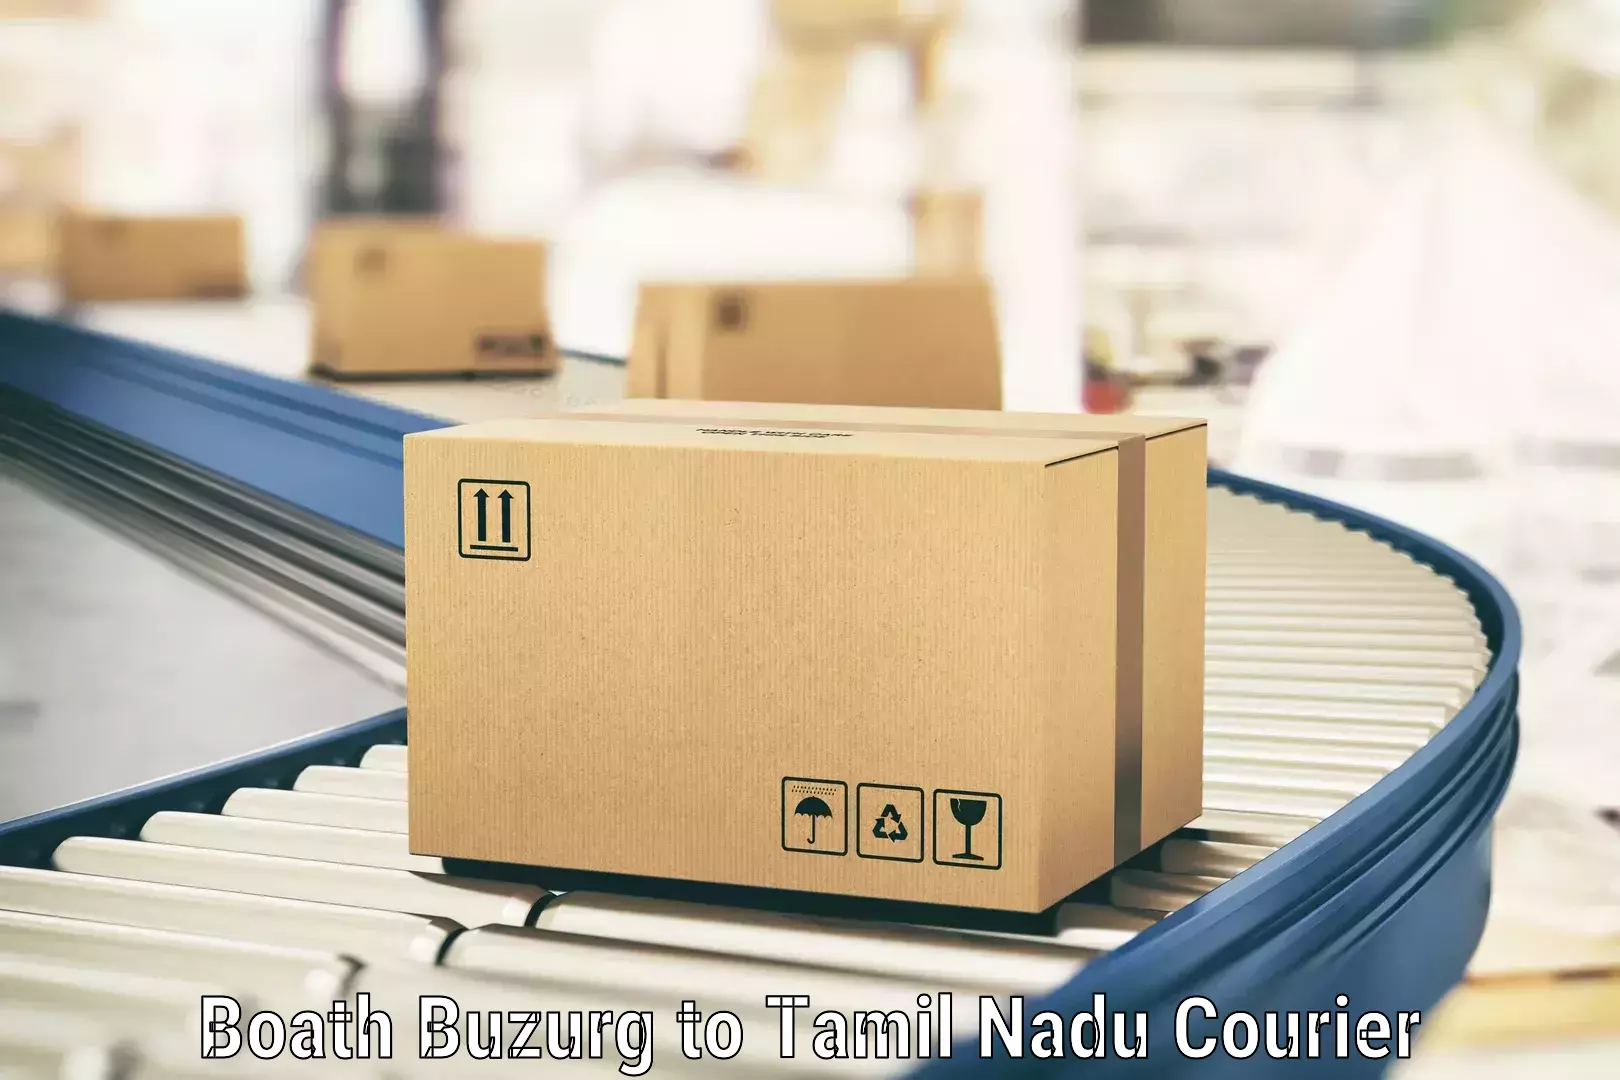 Quality courier services Boath Buzurg to Coimbatore